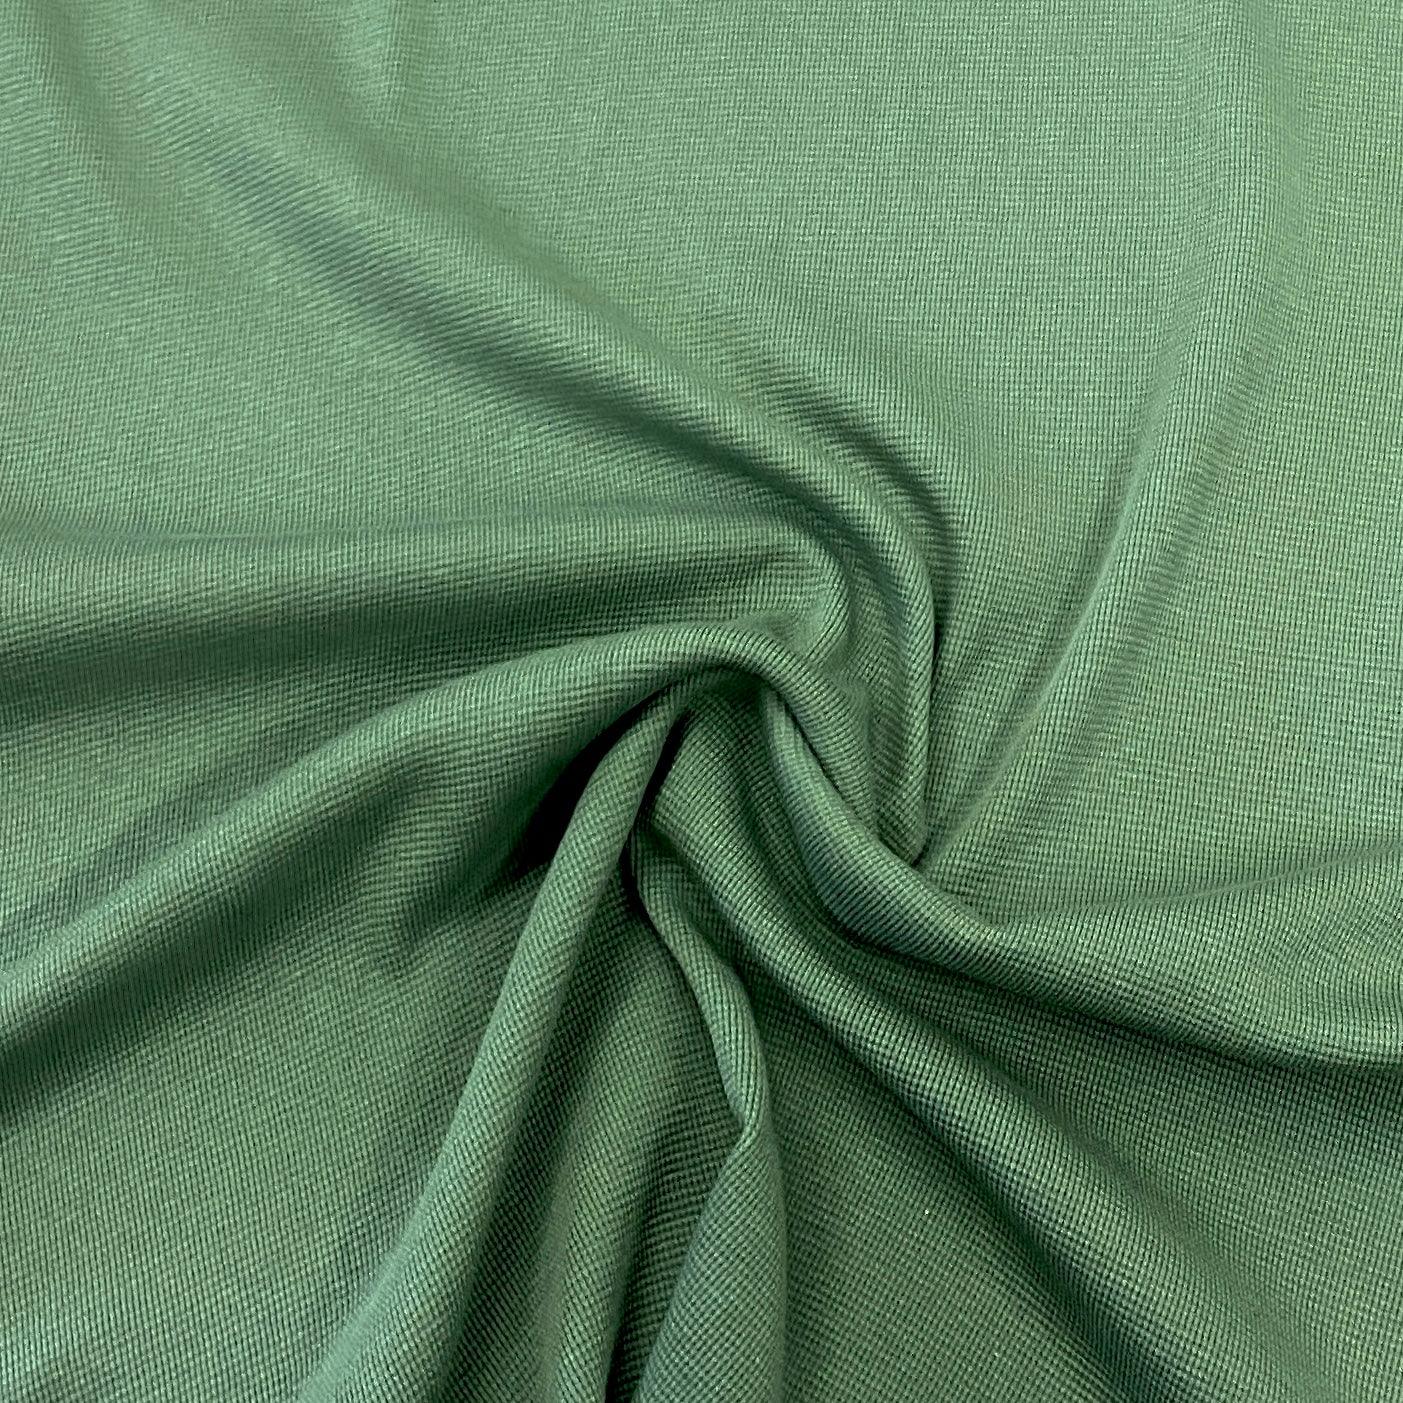 Sage Polyester/Spandex/Cotton Thermal Fabric - Nature's Fabrics